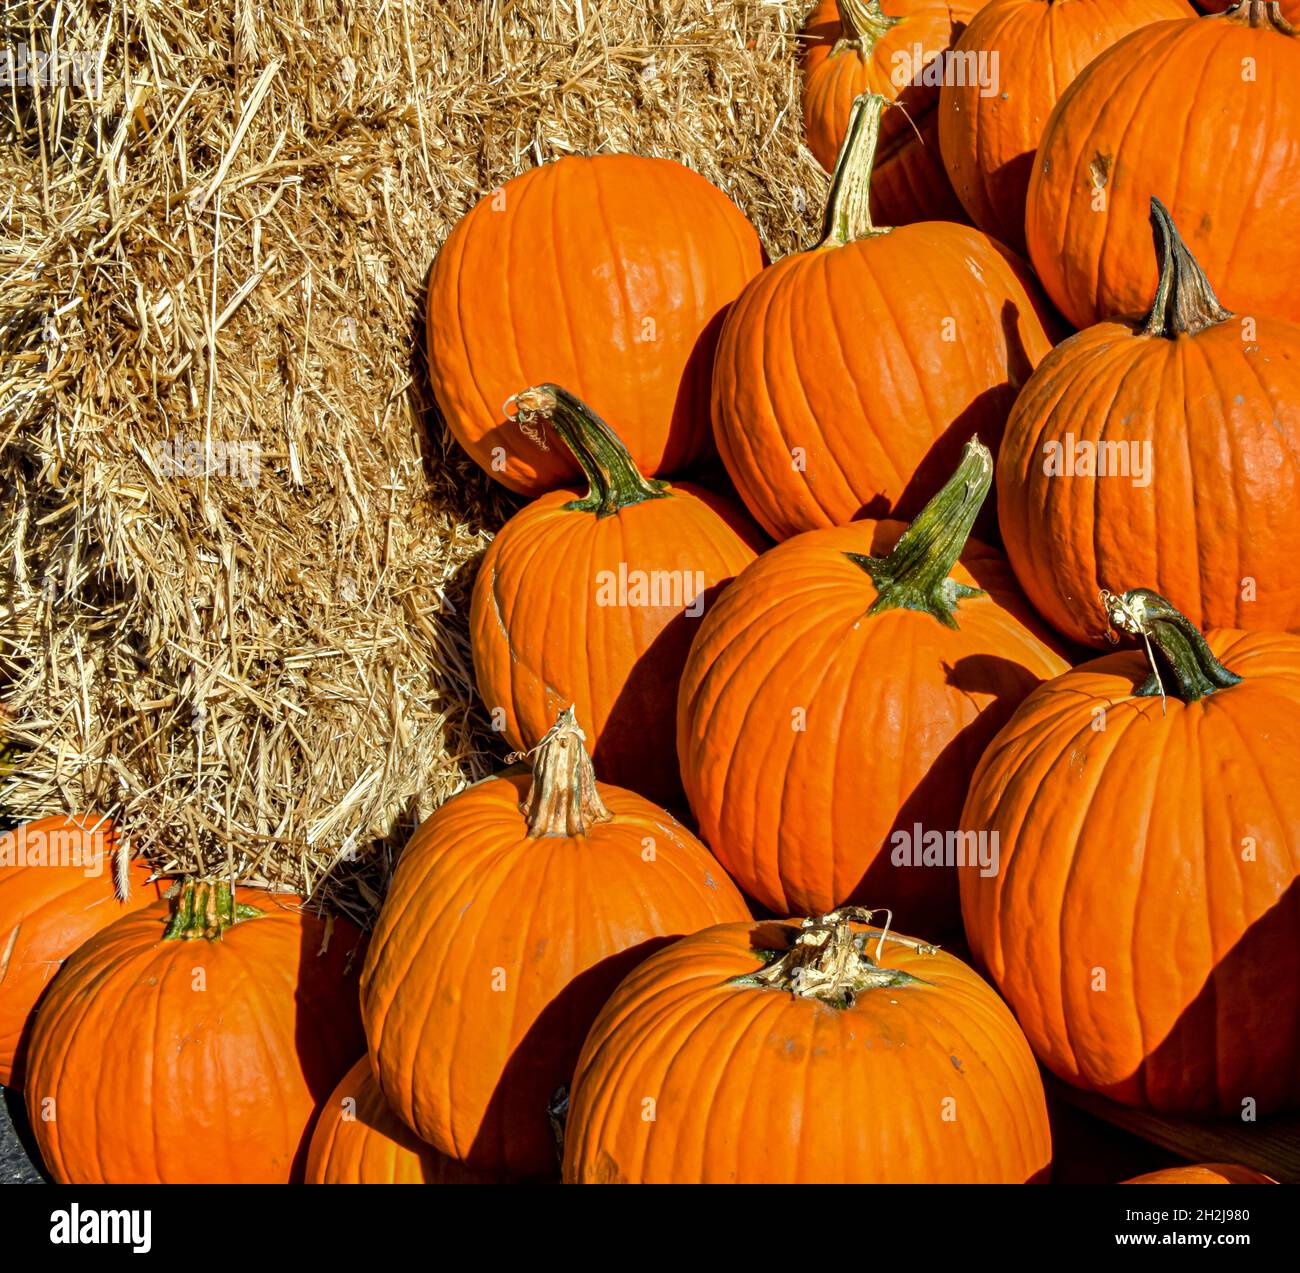 Pumpkins and hay bales with room for copy space. Vertical format. Stock Photo